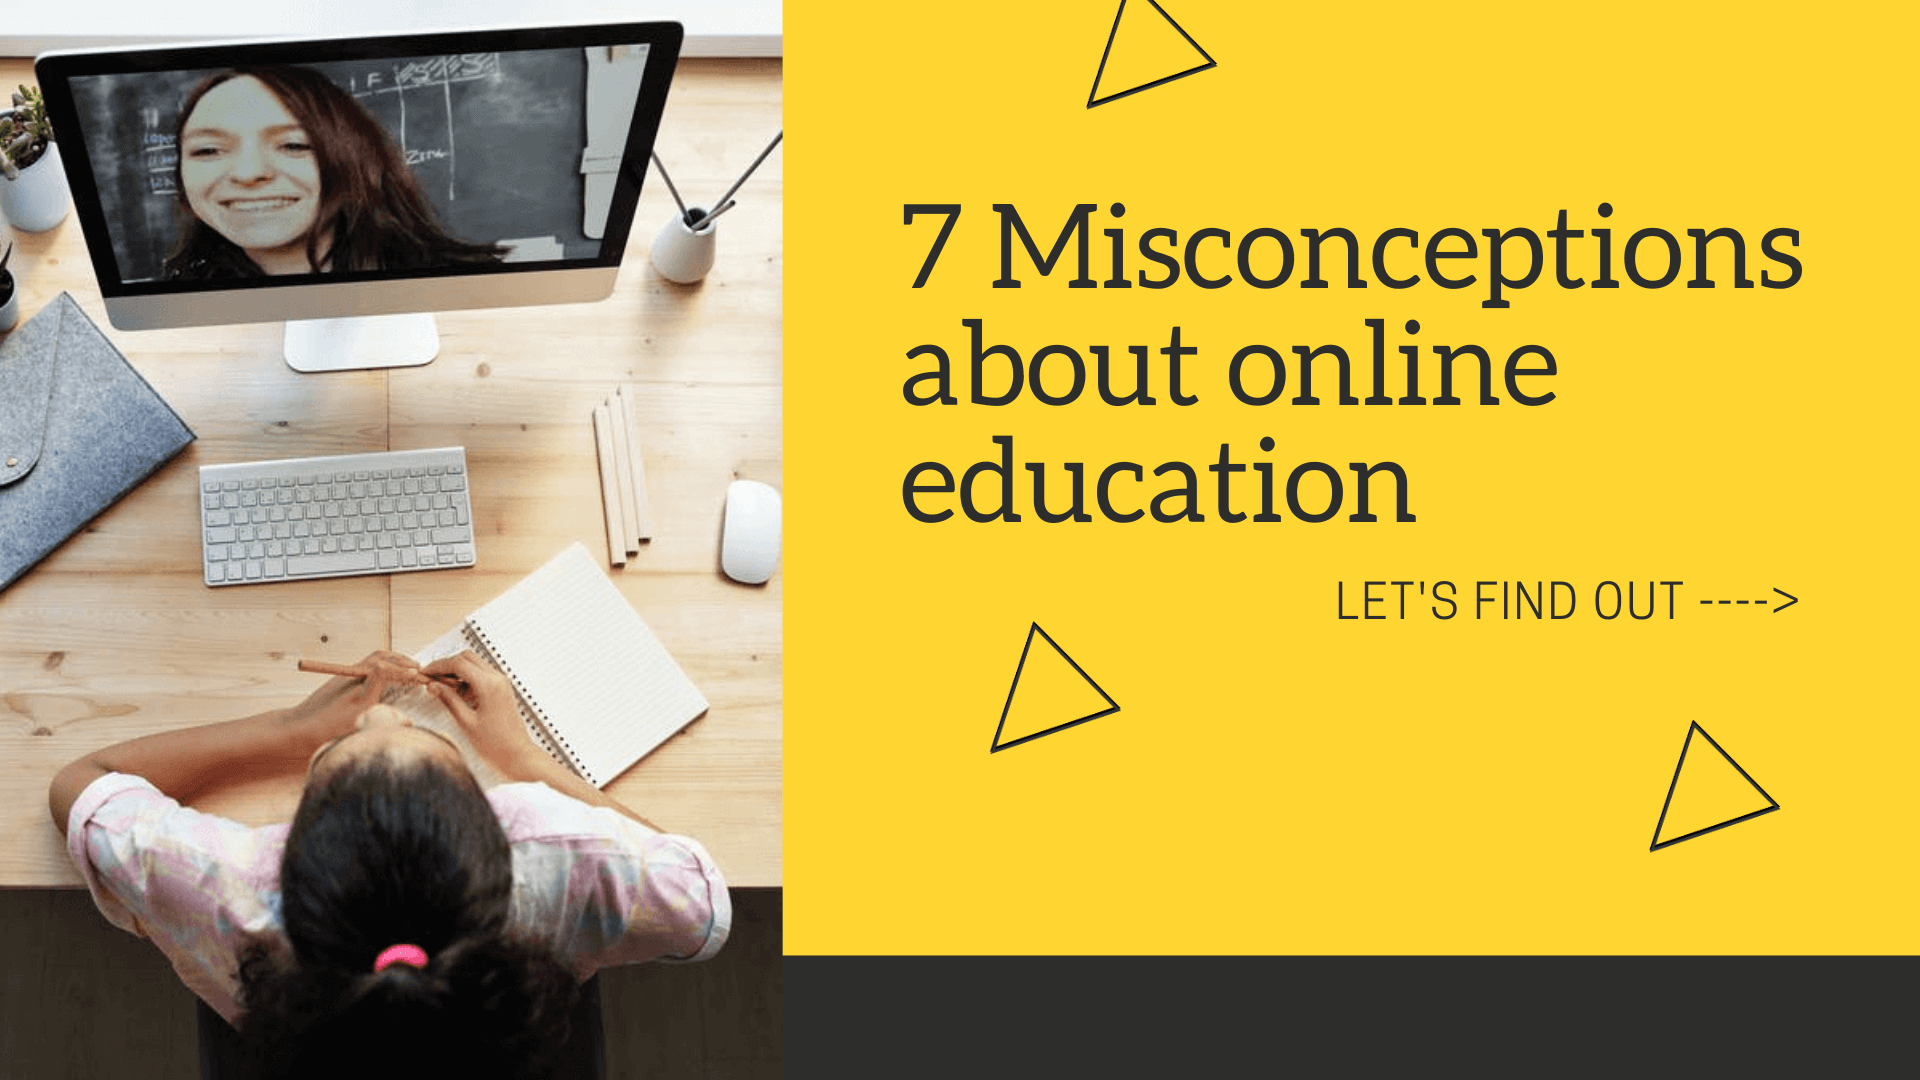 7 Misconceptions about online education? Let's find out